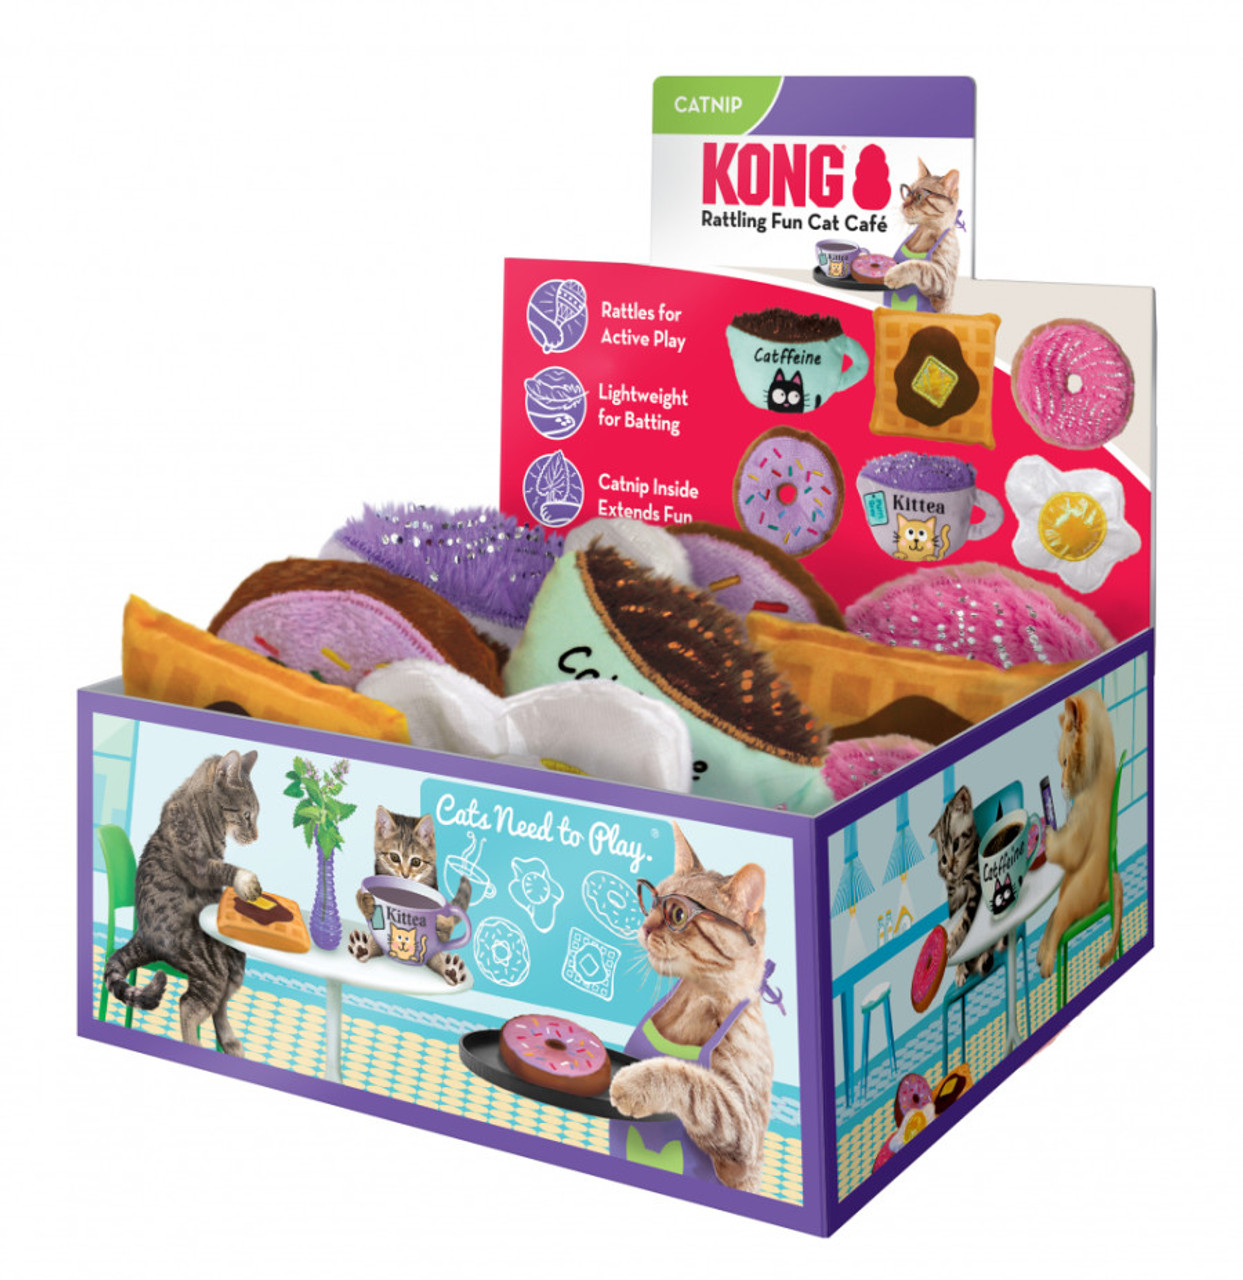 Breakfast Food Cat Toys for Hungry Kitties!